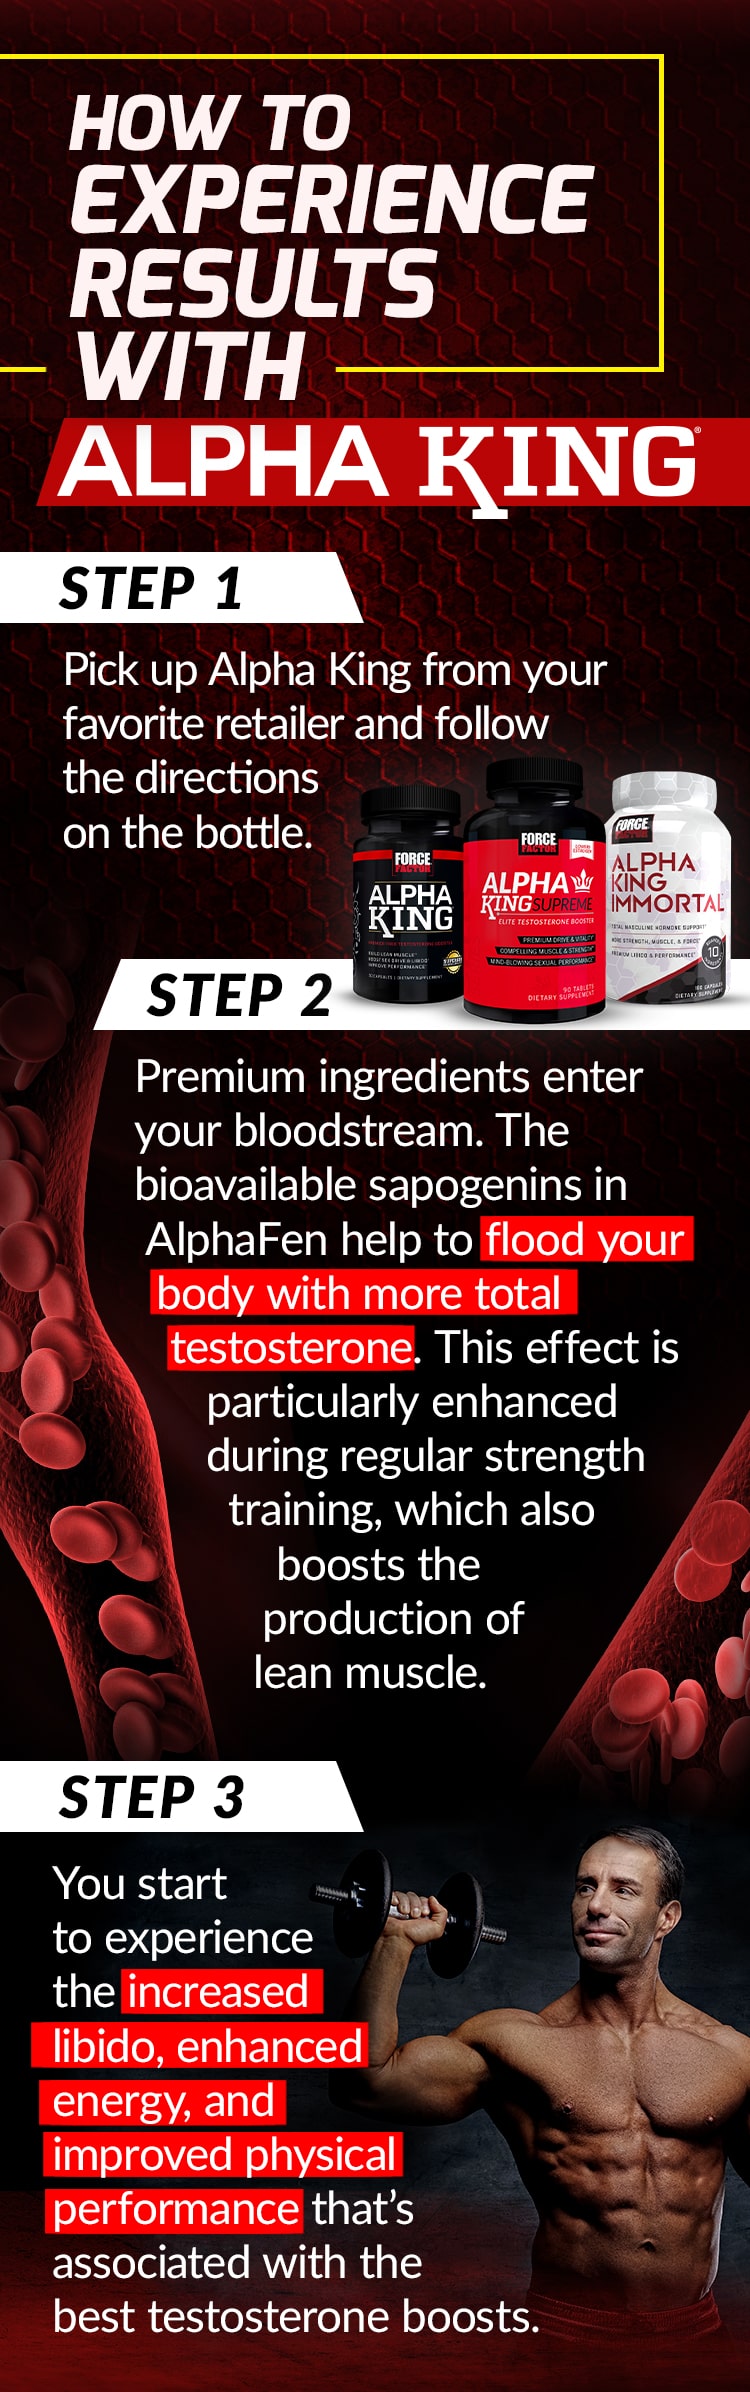 HOW TO EXPERIENCE RESULTS WITH ALPHA KING. STEP 1 - Pick up Alpha King from your favorite retailer and follow the directions on the bottle. STEP 2 - Premium ingredients enter your bloodstream. The bioavailable sapogenins in AlphaFen help to flood your body with more total testosterone. This effect is particularly enhanced during regular strength training, which also boosts the production of lean muscle. STEP 3 - You start to experience the increased libido, enhanced energy, and improved physical performance that’s associated with the best testosterone boosts.